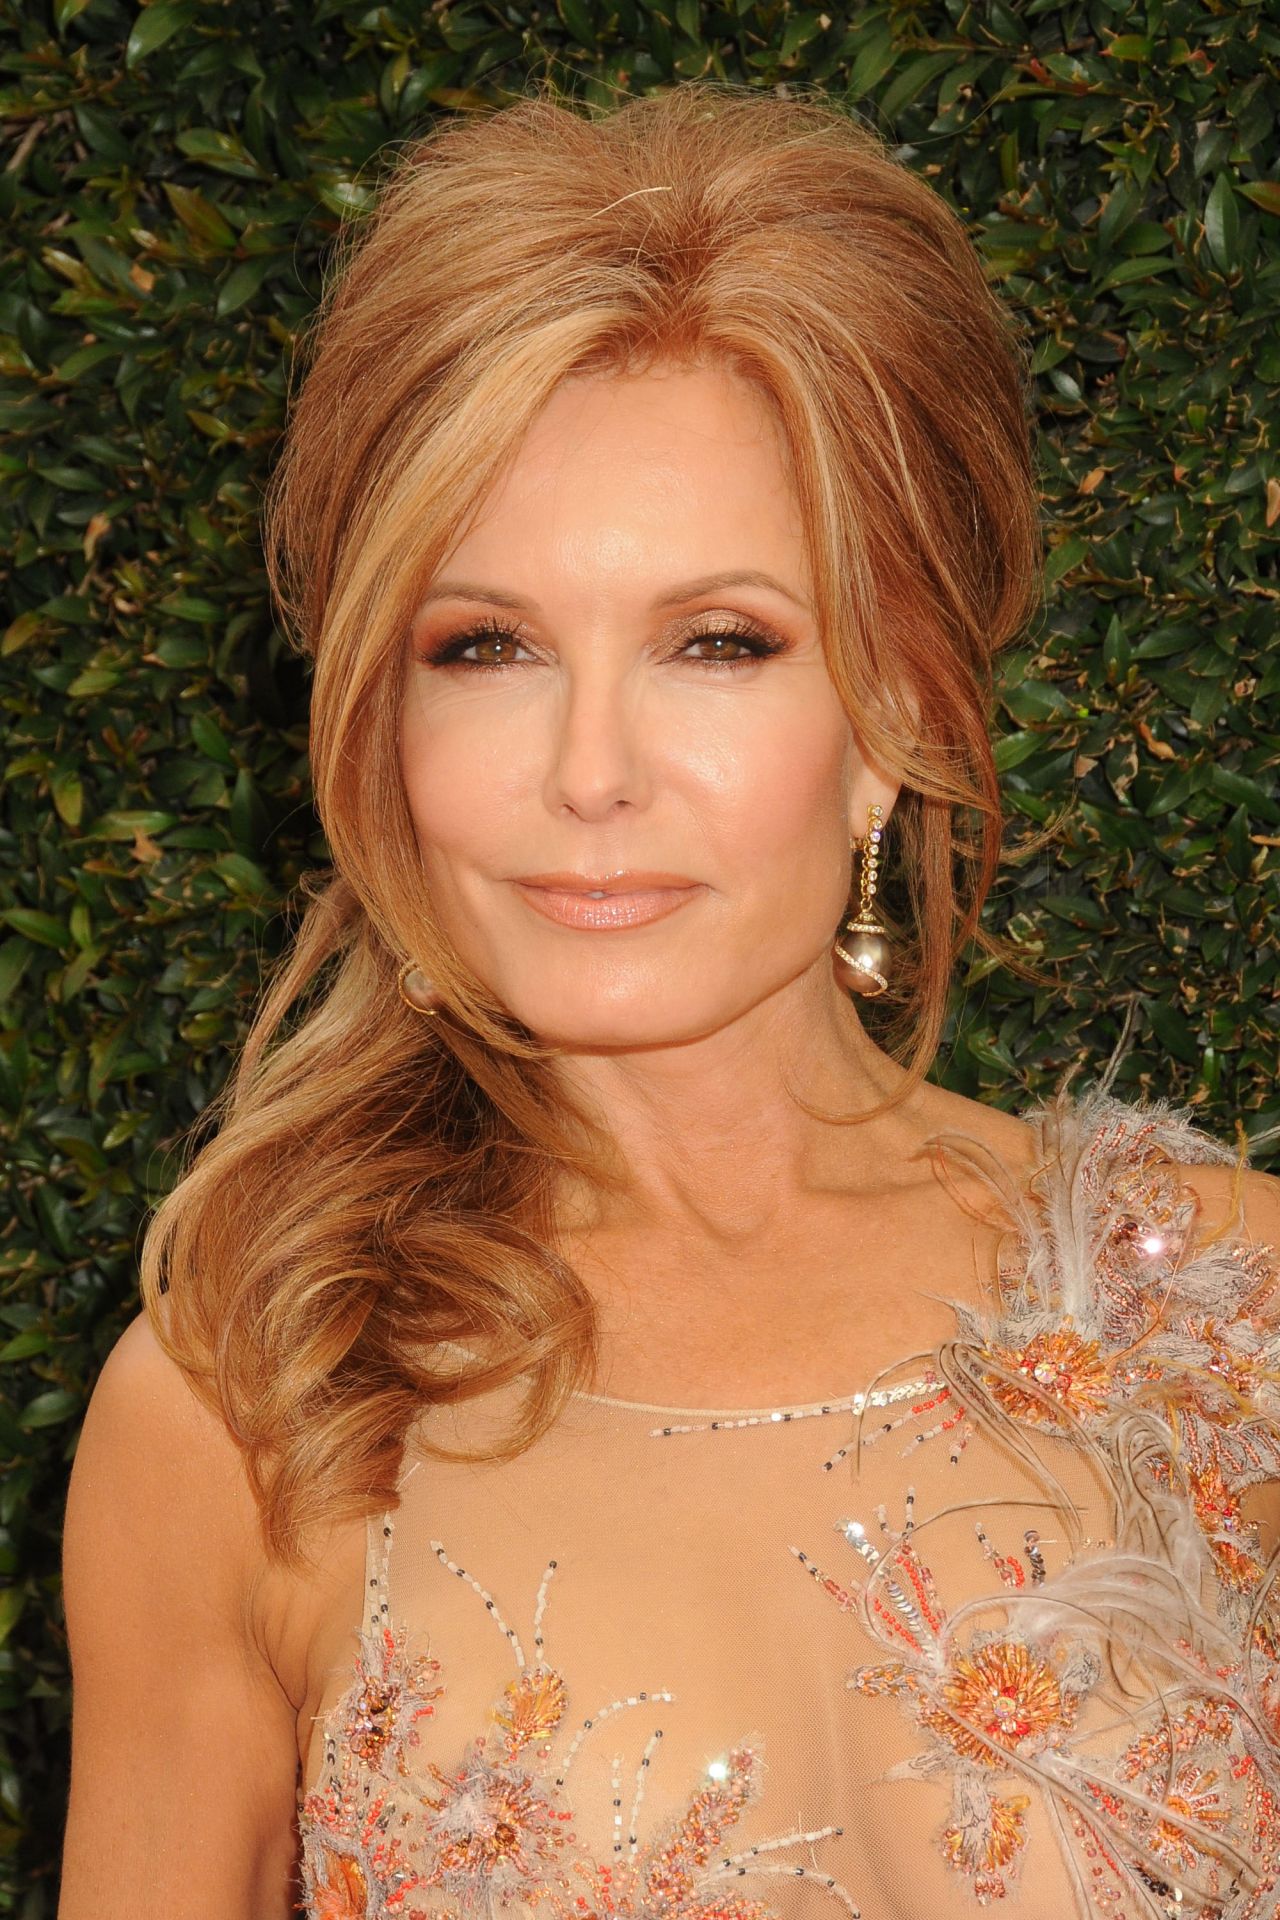 tracey-bregman-2016-daytime-emmy-awards-in-los-angeles-2.